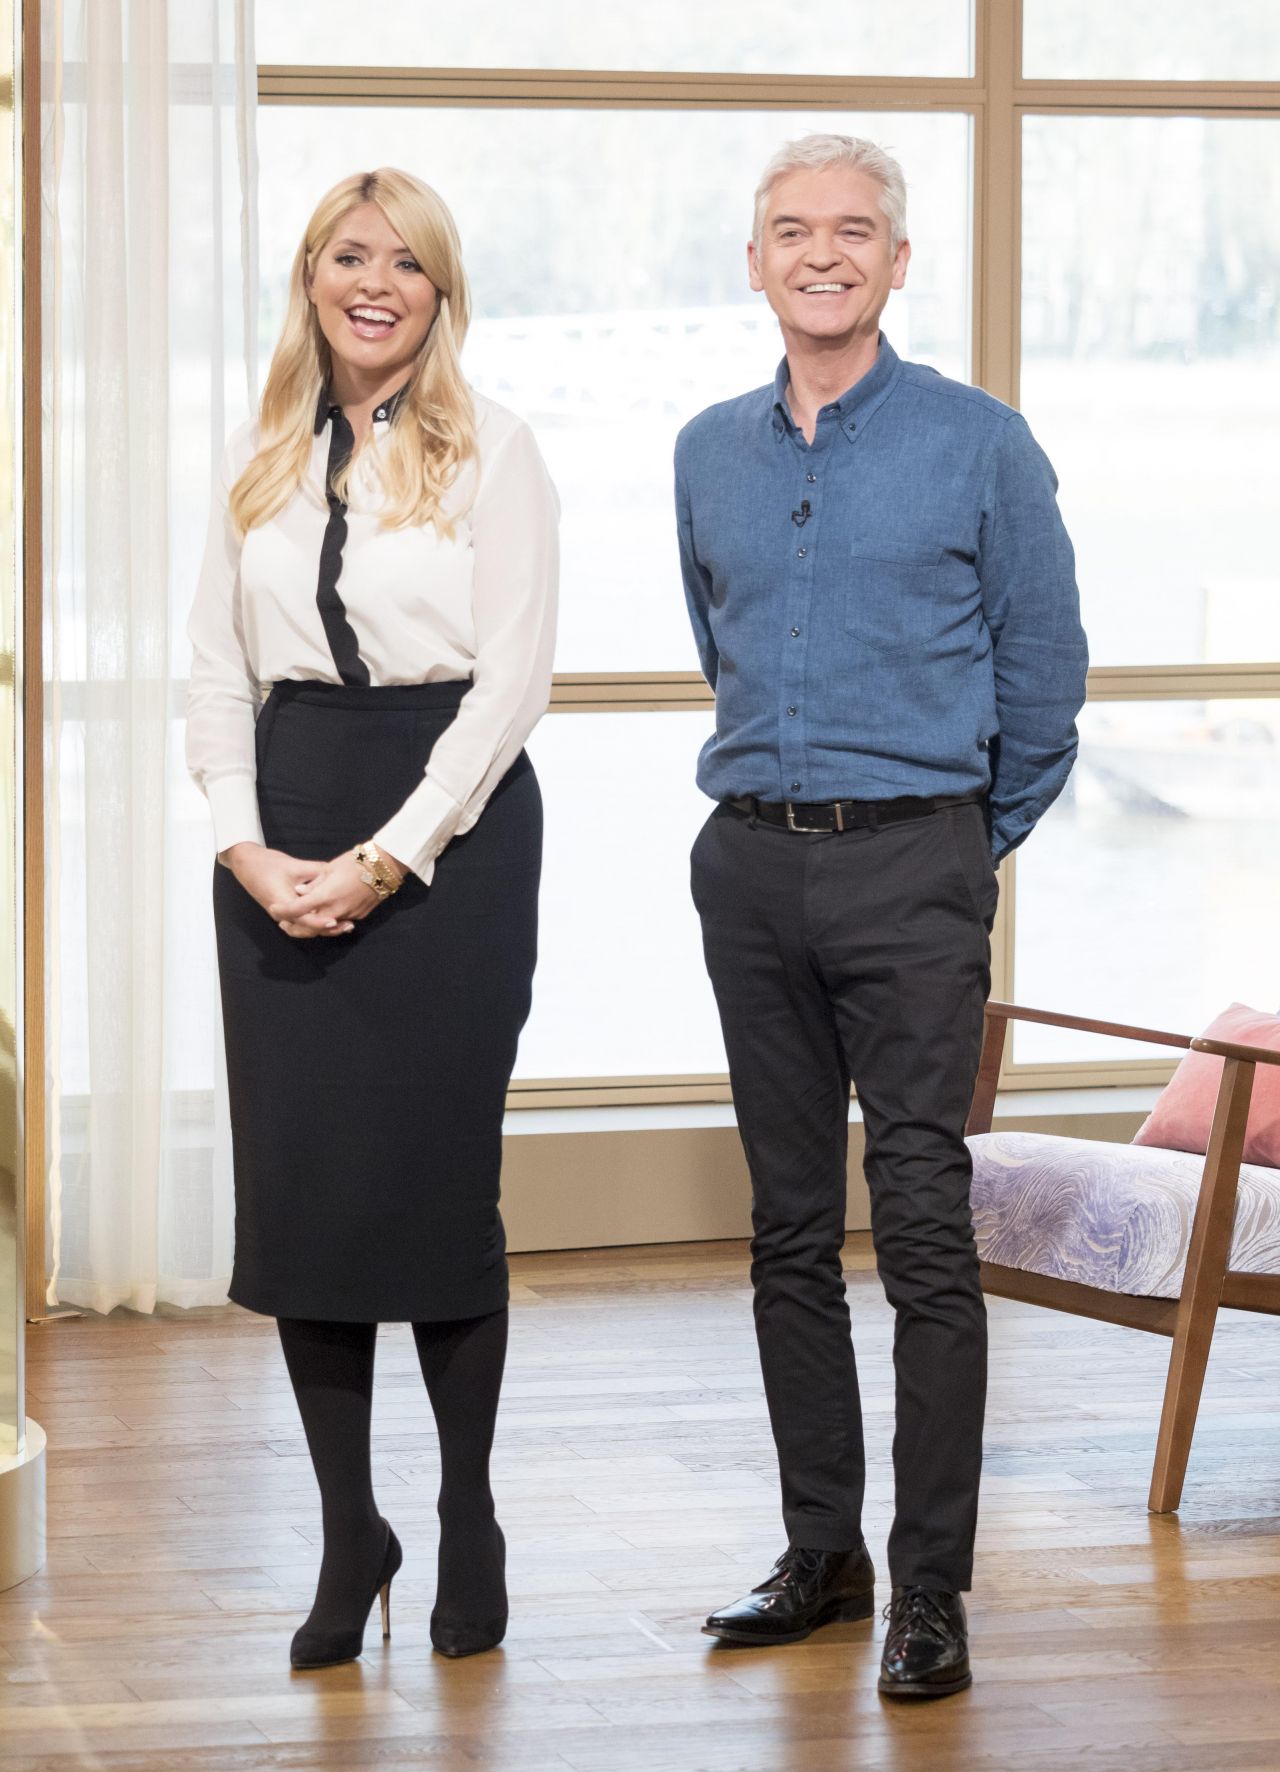 Holly Willoughby - 'This Morning' TV Show in London, January 2016